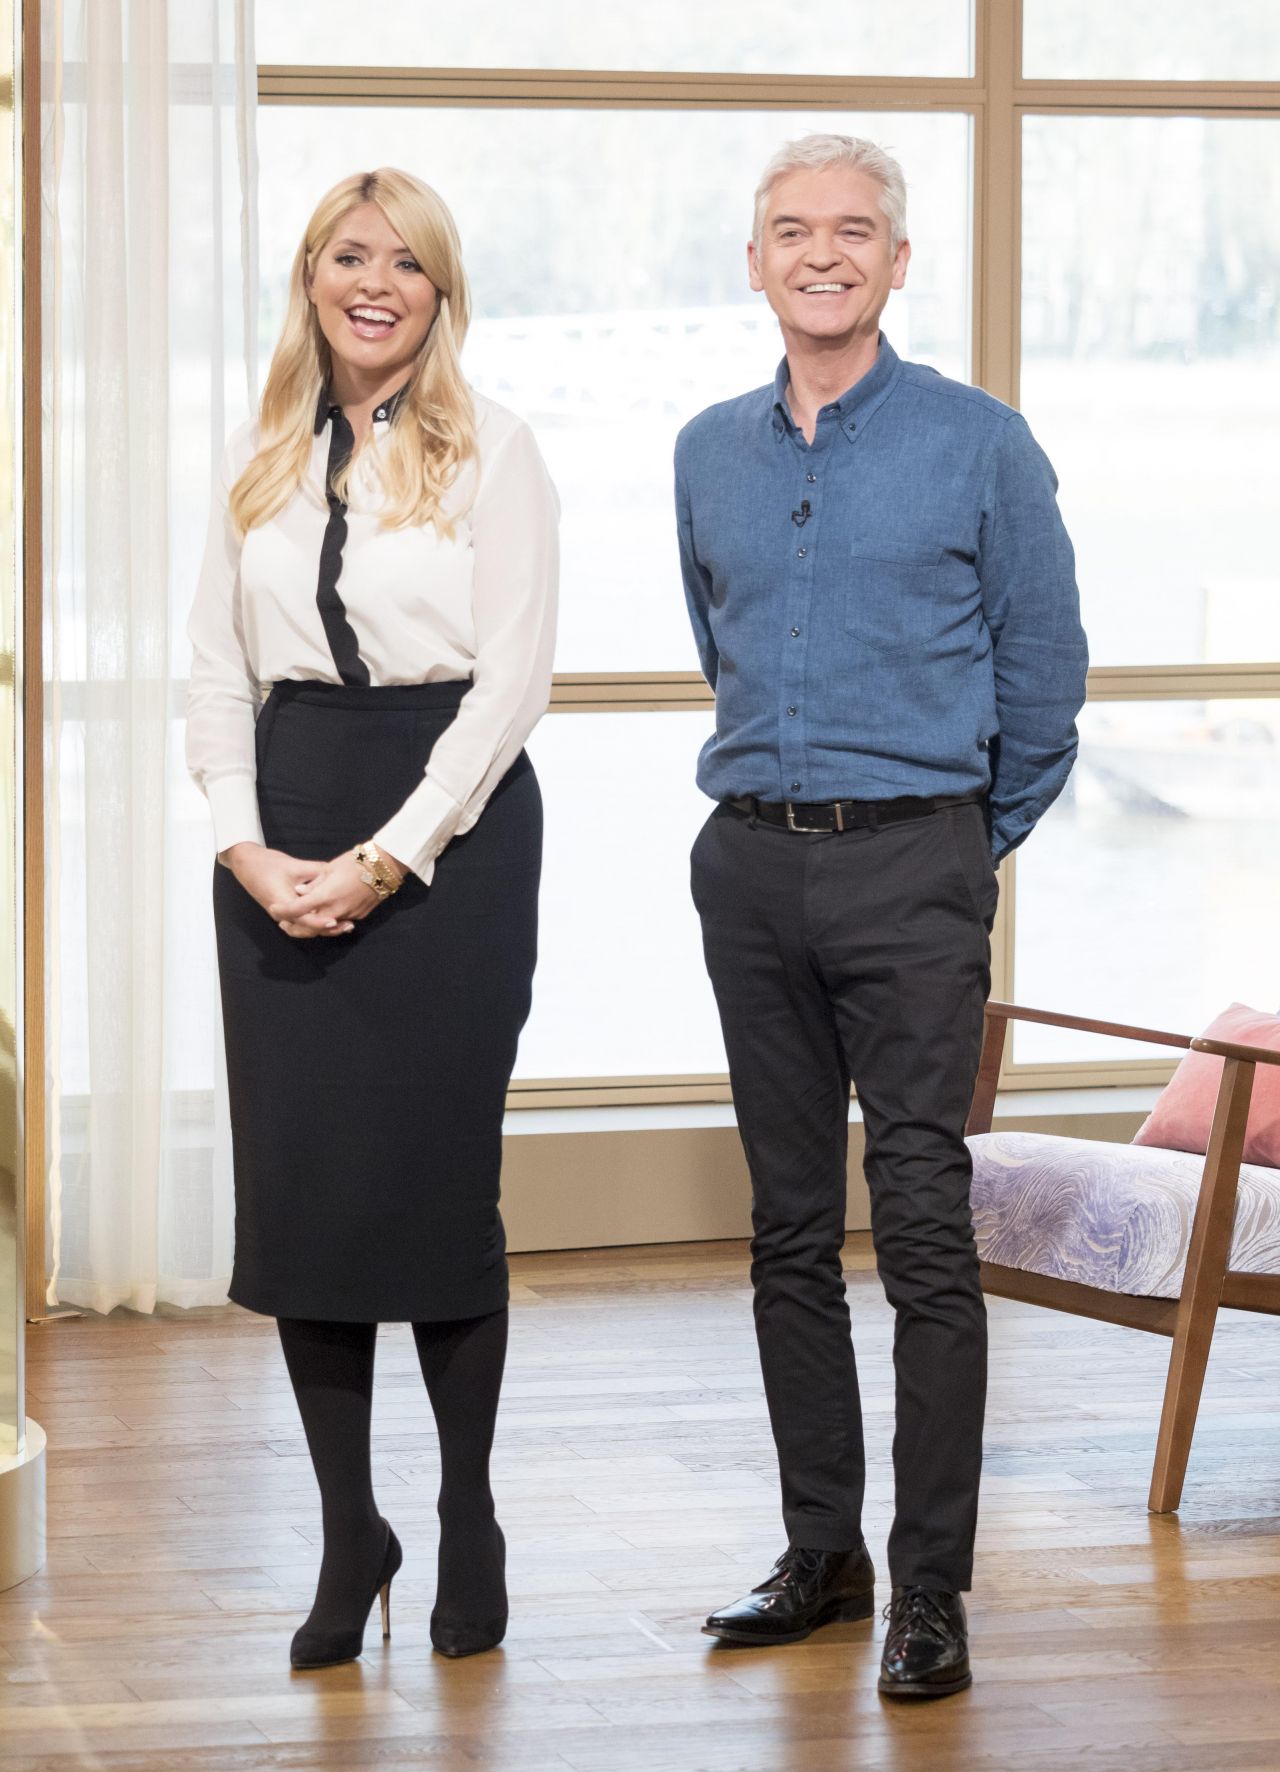 Holly Willoughby - 'This Morning' TV Show in London, January 2016